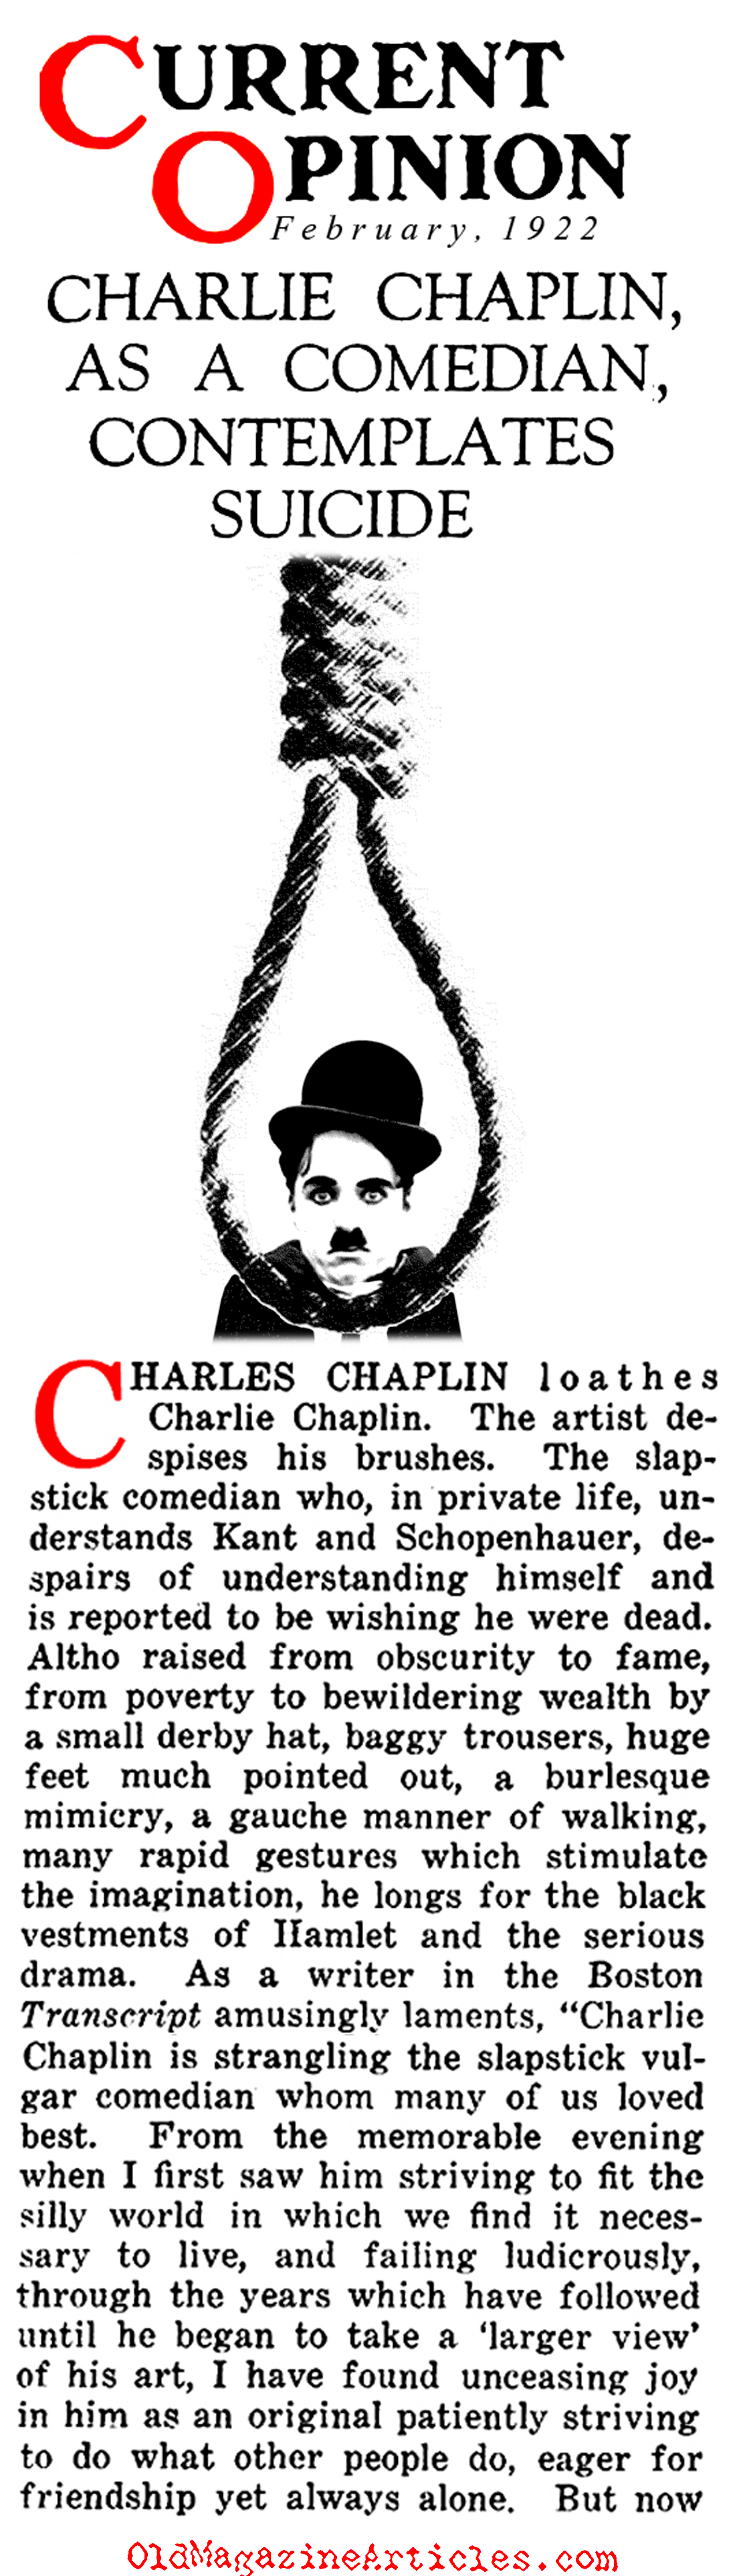 Charlie Chaplin Wanted to be Taken Seriously (Current Opinion, 1922)